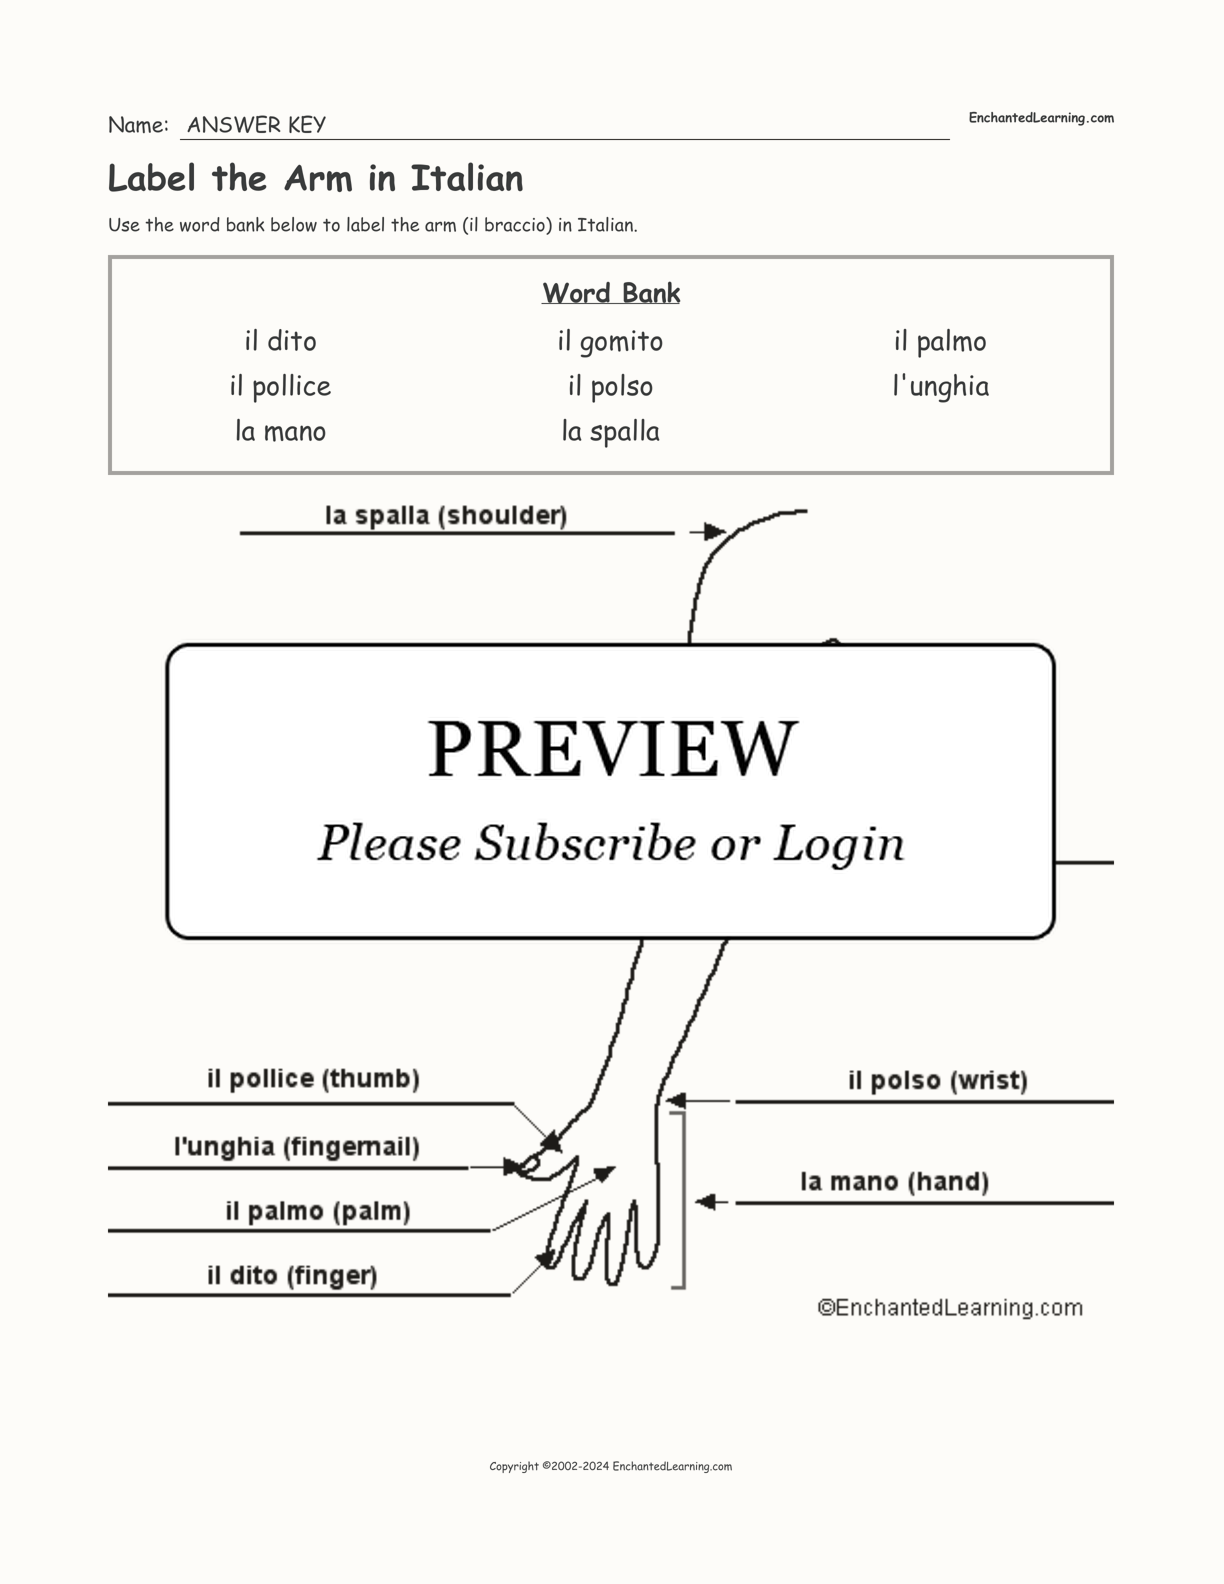 Label the Arm in Italian interactive worksheet page 2